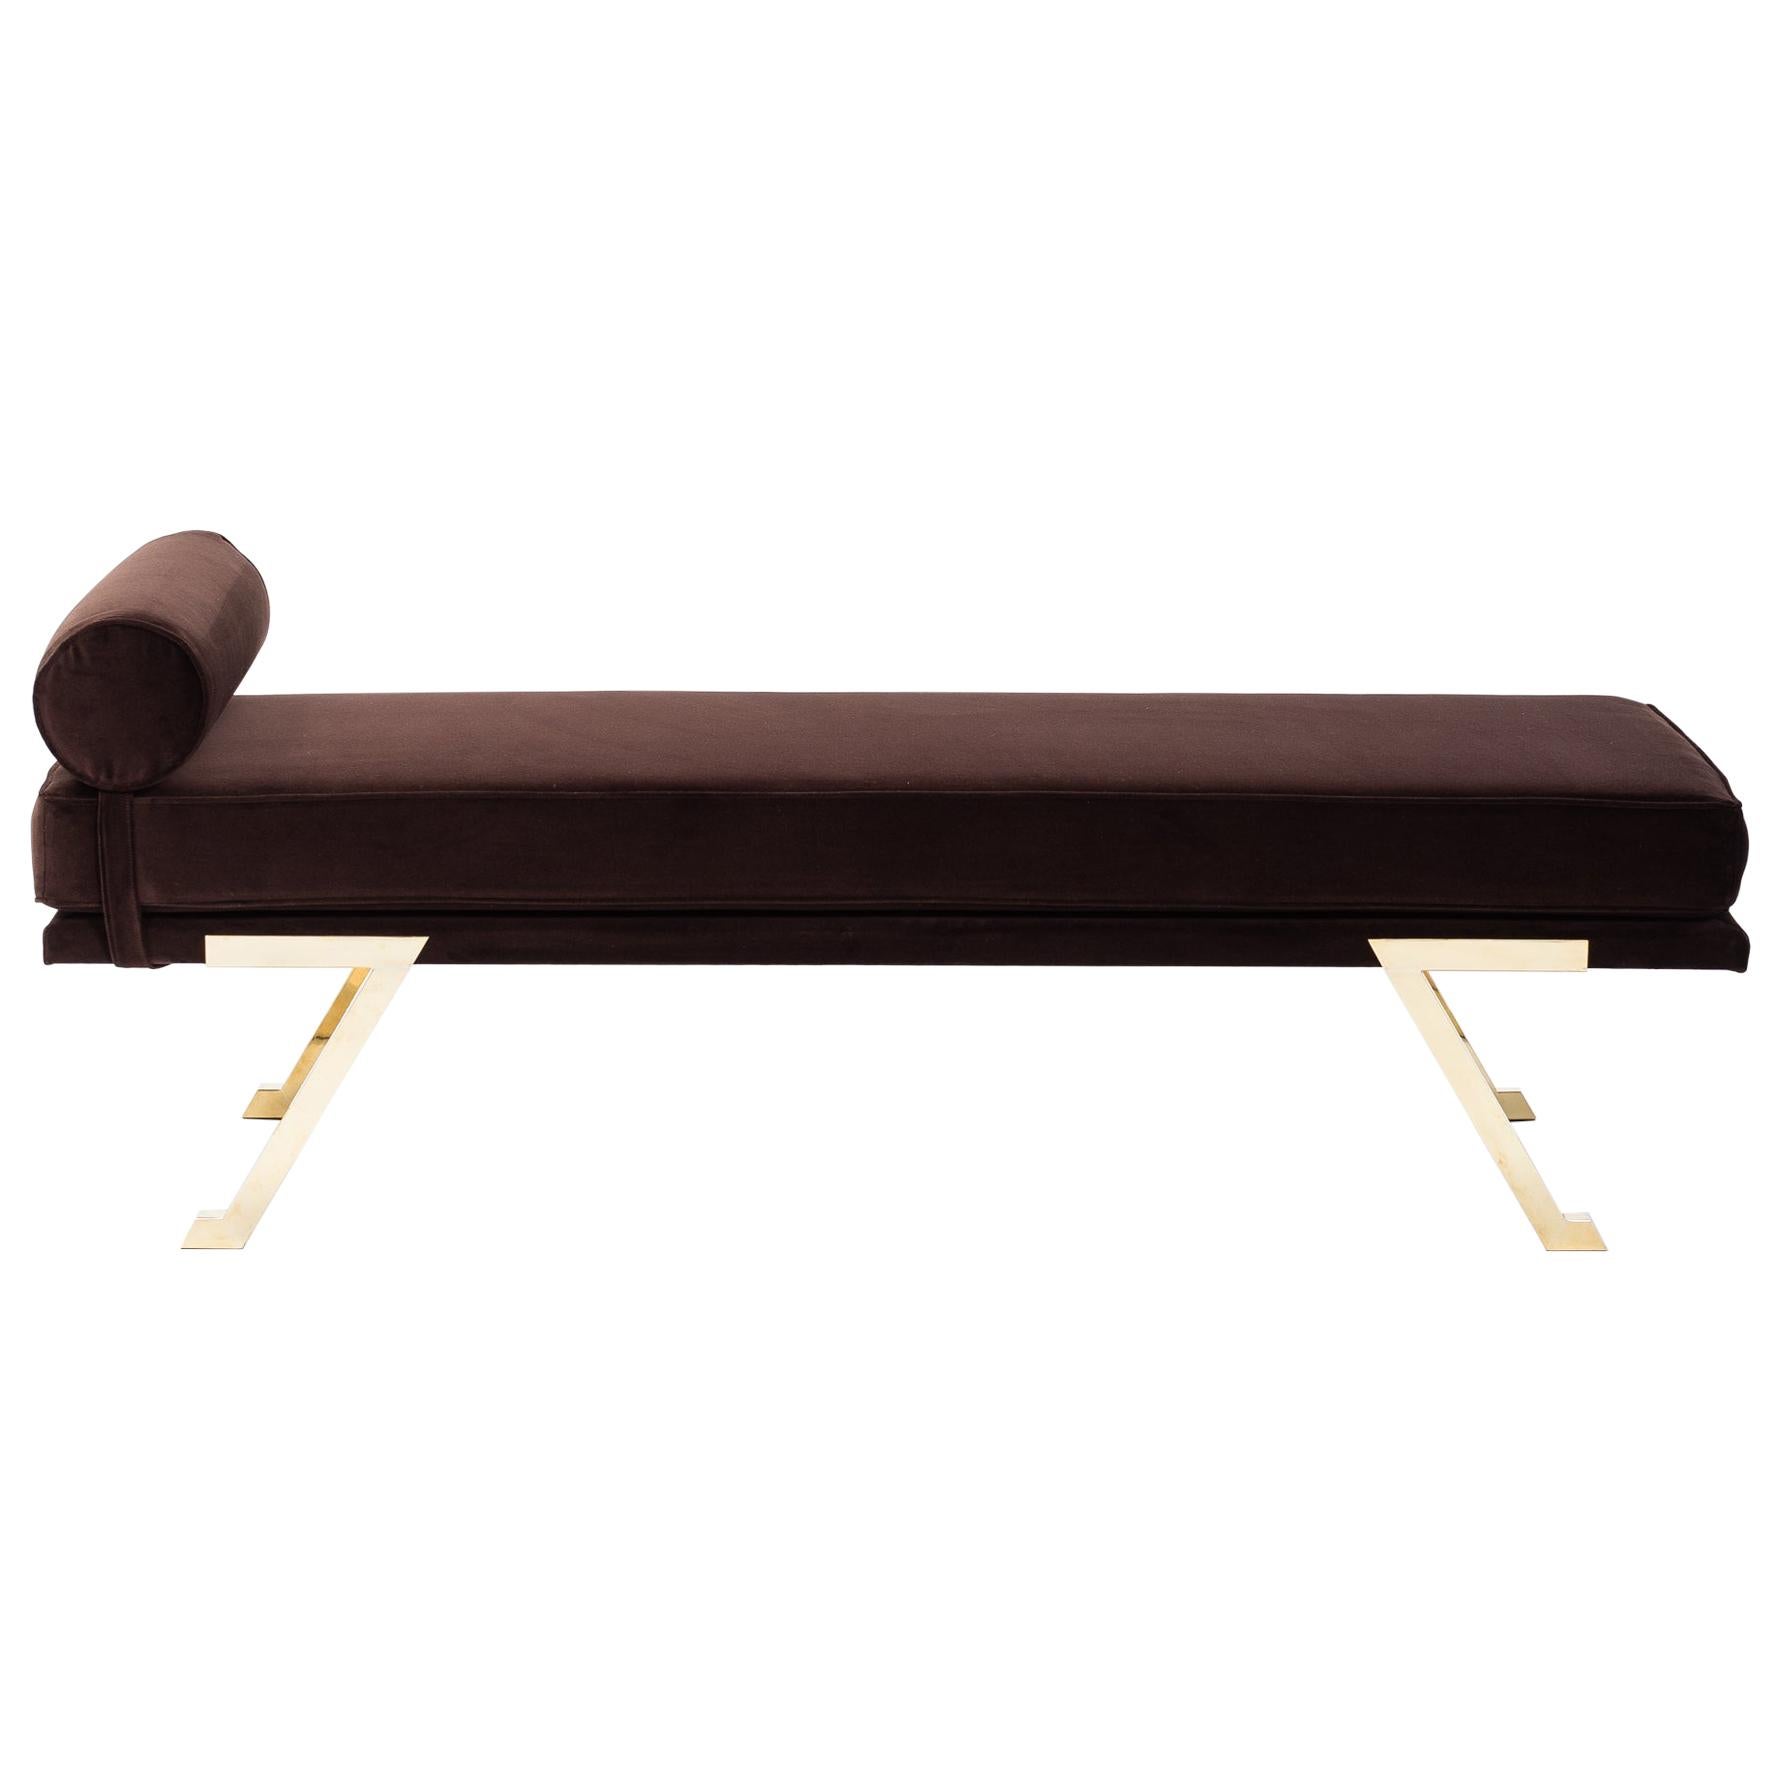 Wonderful Italian Mid-Century daybed / bench / settee in a clear design of the seventies.
Heavy, solid, geometric brass legs combined with chocolate brown velvet from Pierre Frey.
(Completely reupholstered).
The mattress (11cm) rests loosely on the